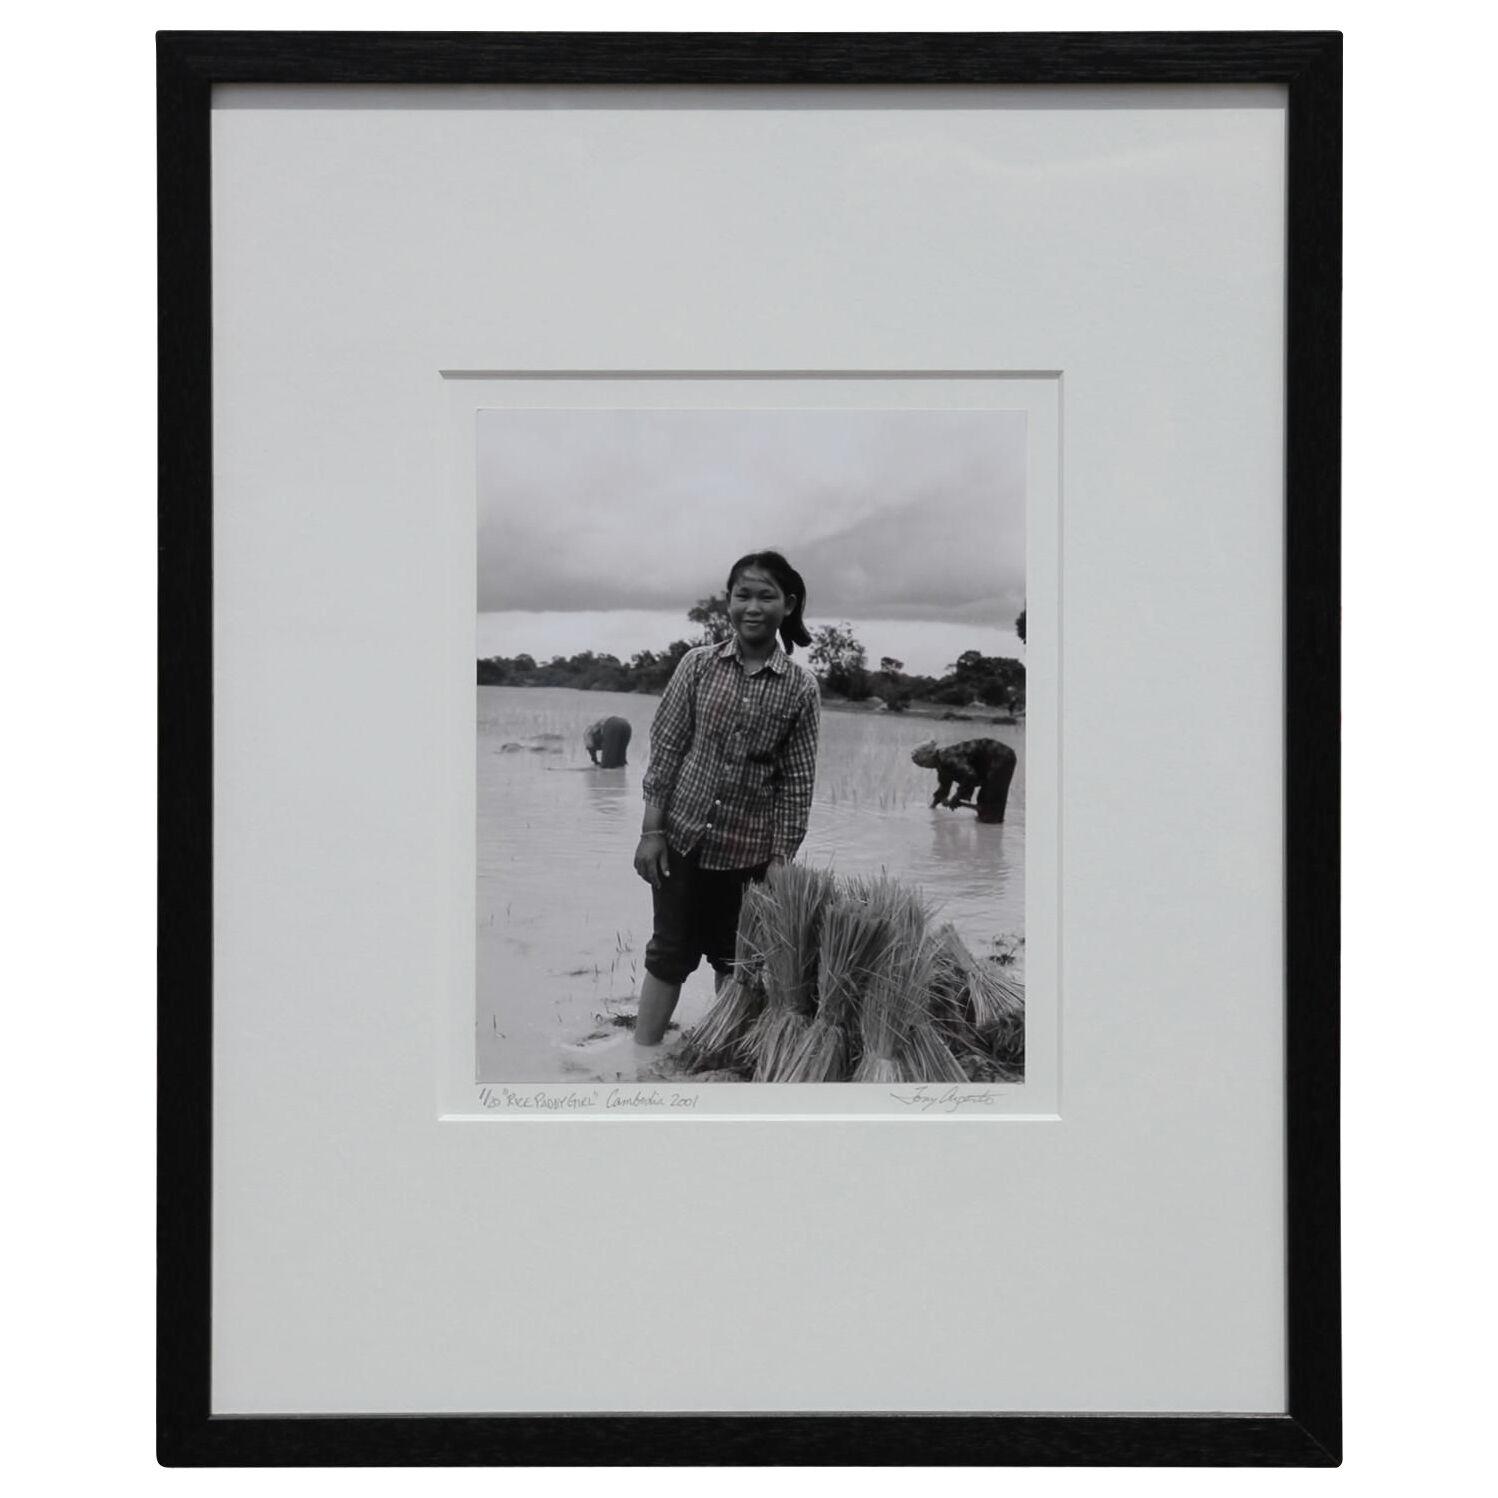 "Rice Paddy Girl" Siem Reap, Cambodia Black White Photograph Early 21st Century